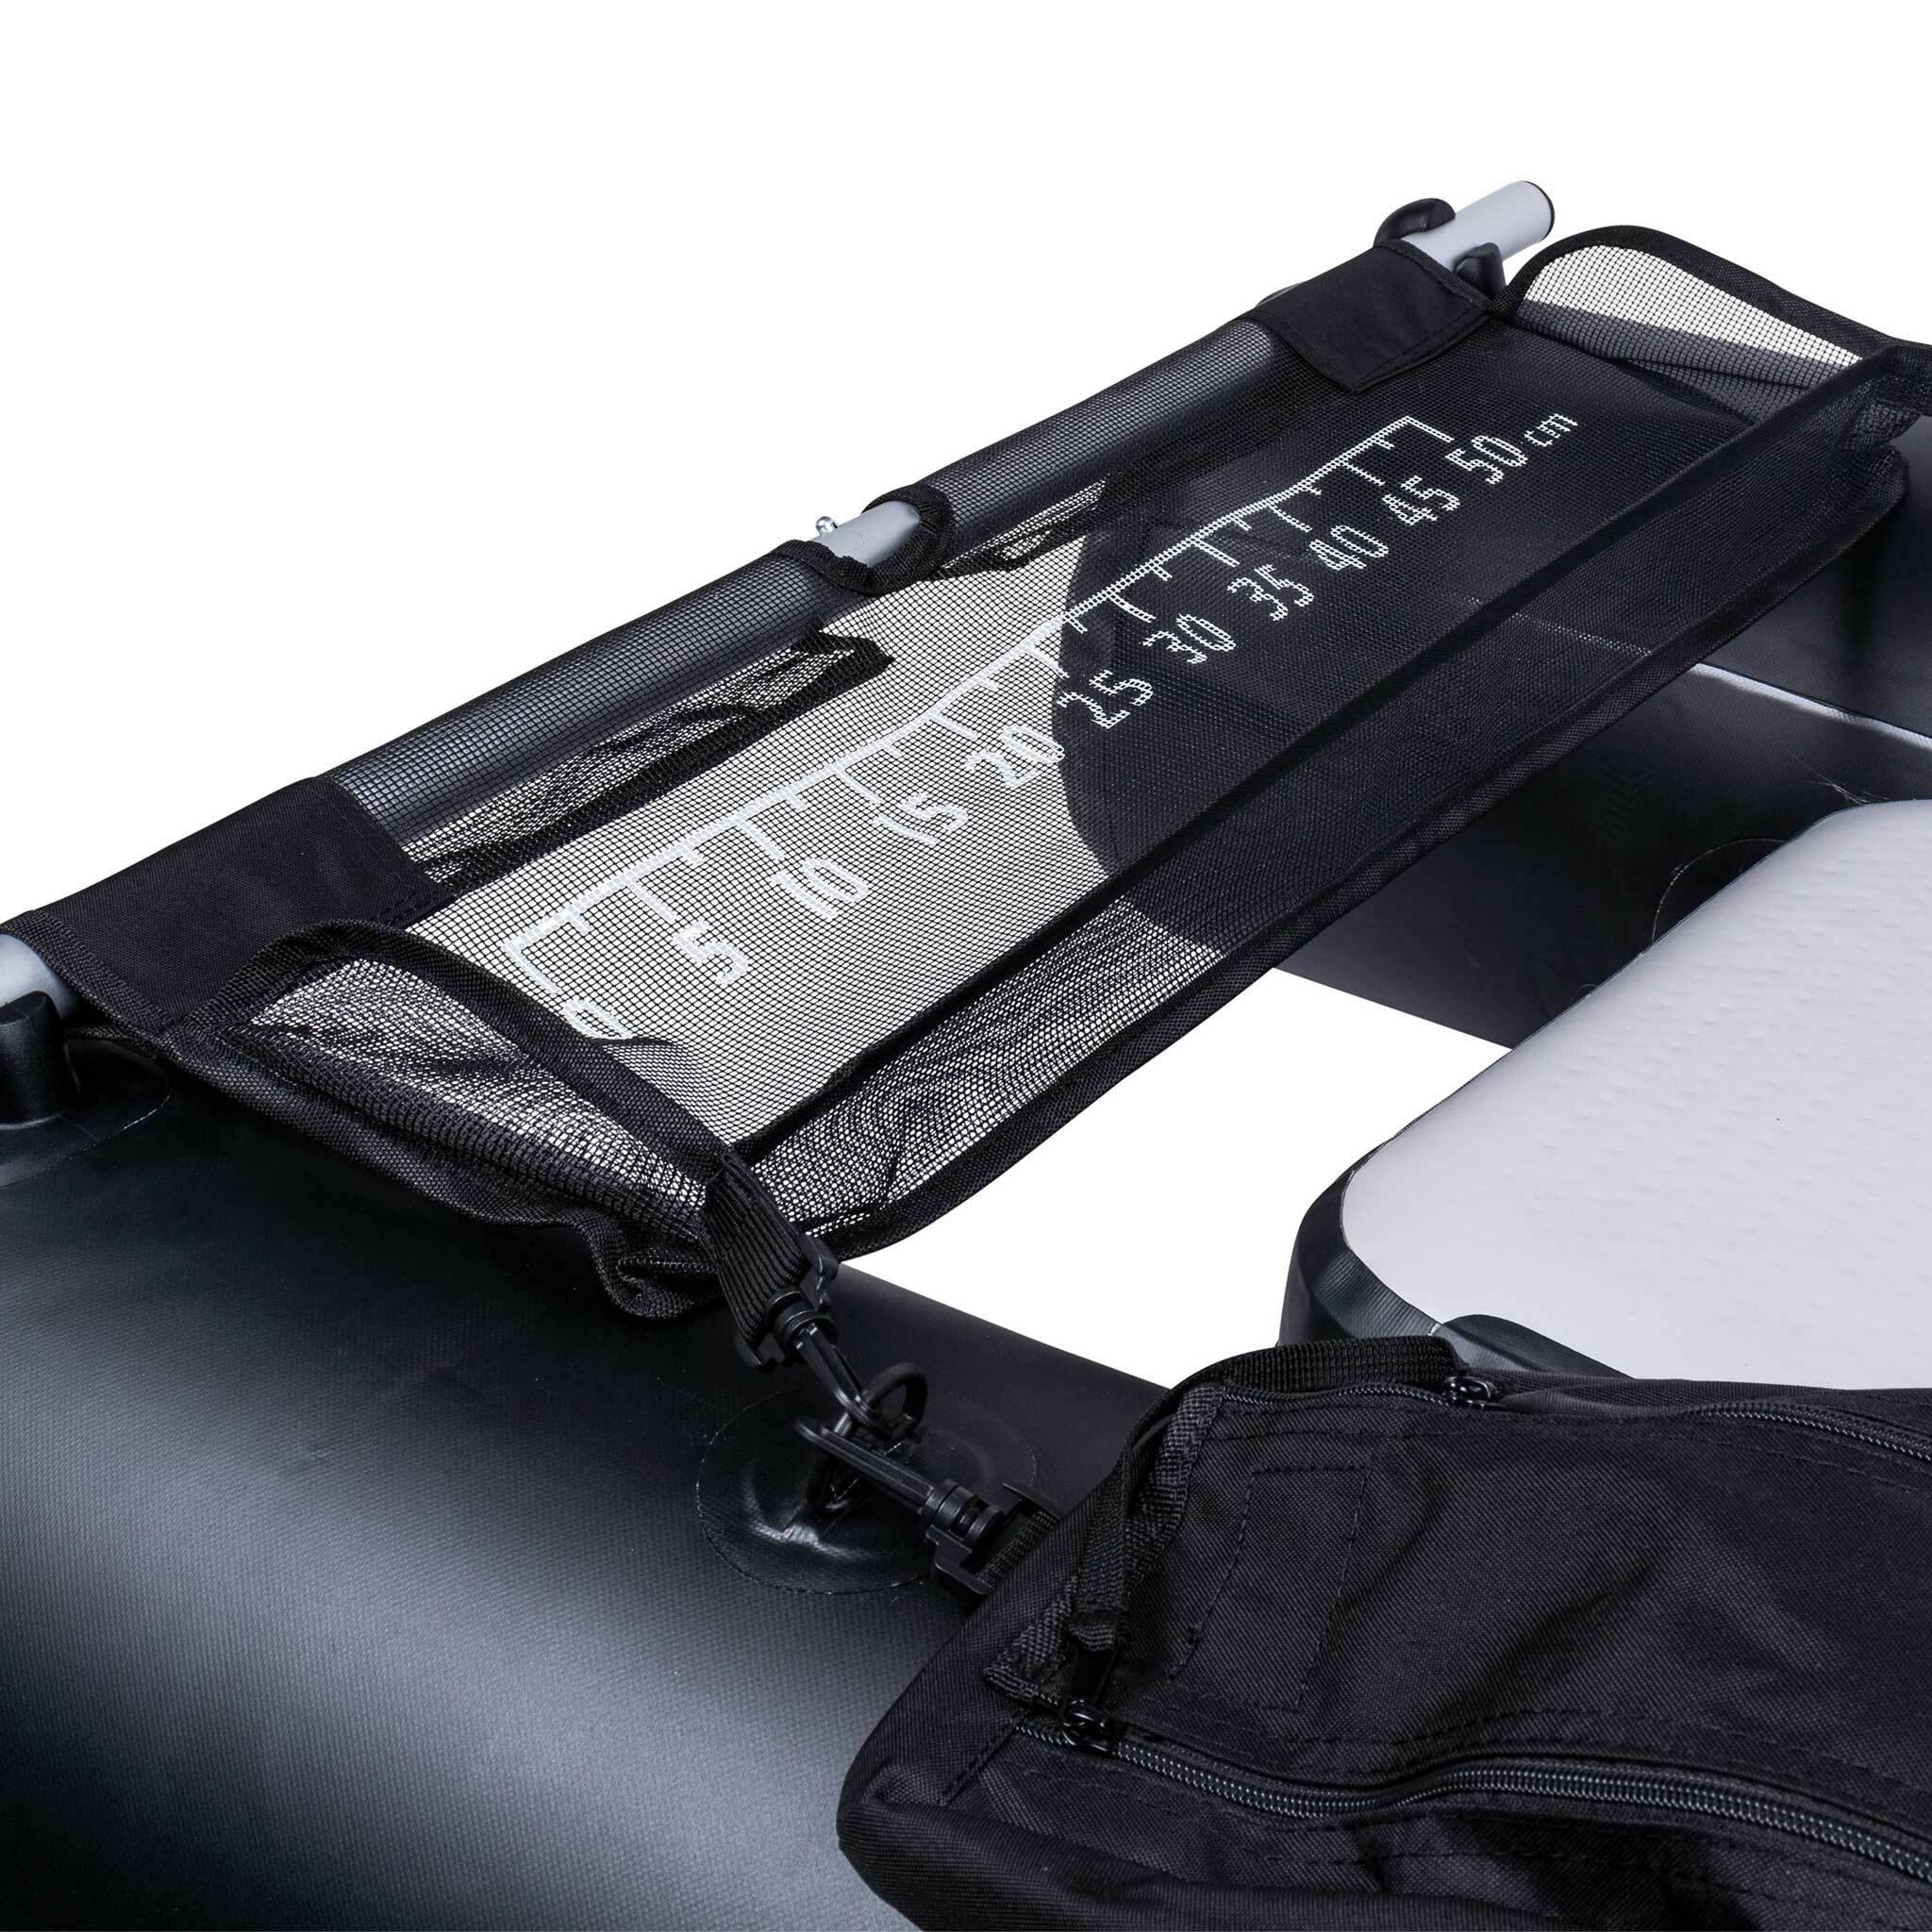 A Hands On Test Of The Carry-On Barracuda Bag, Luggage Designed For  Frequent Flyers